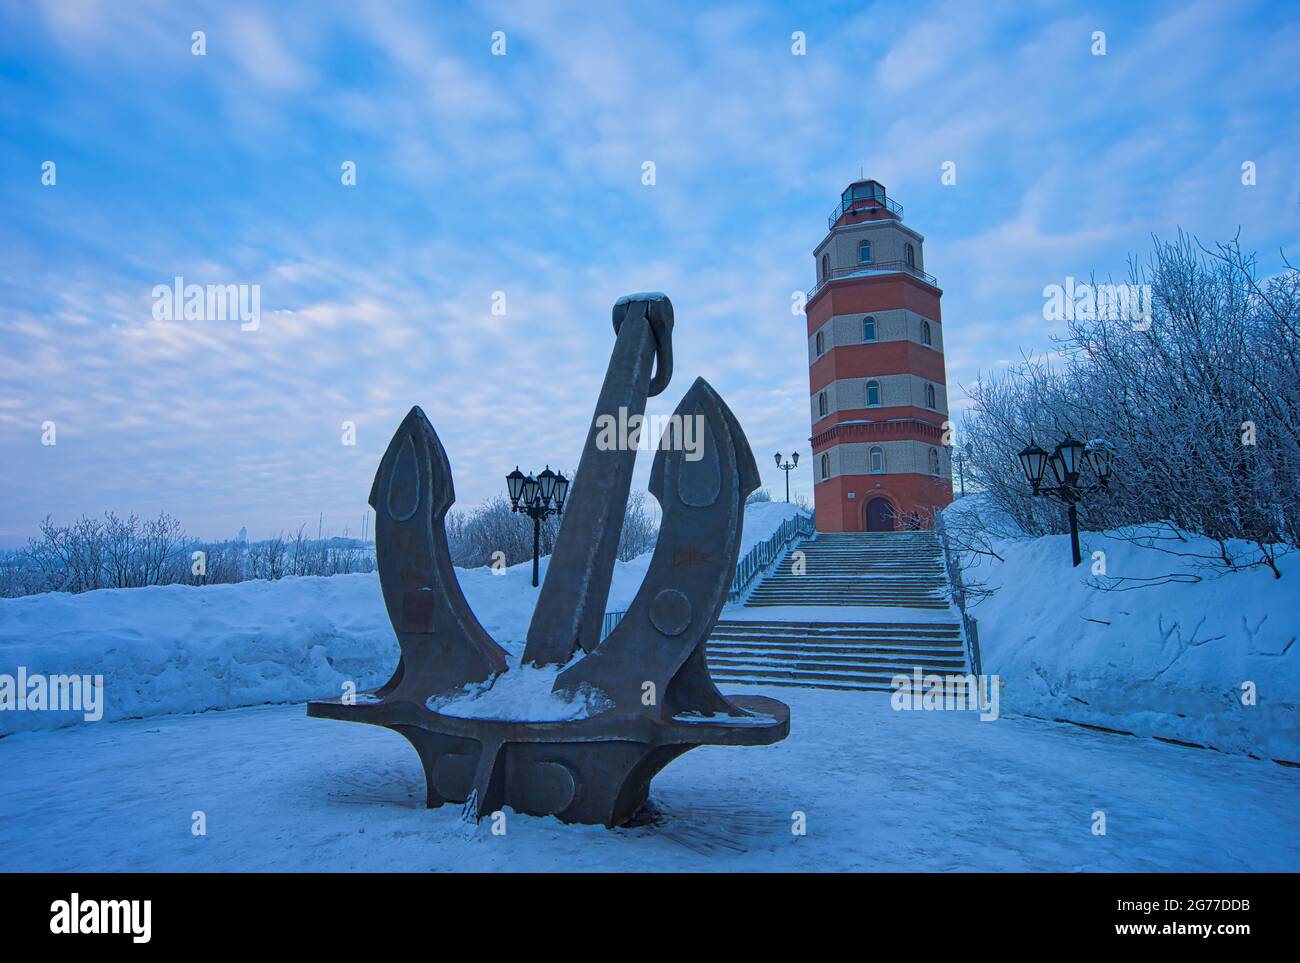 The Monument to the Nuclear Submarine of the Kursk. Murmansk, Russia. Memorial to the brave soldiers who died in the disaster. Snow and anchors. Mar 2 Stock Photo